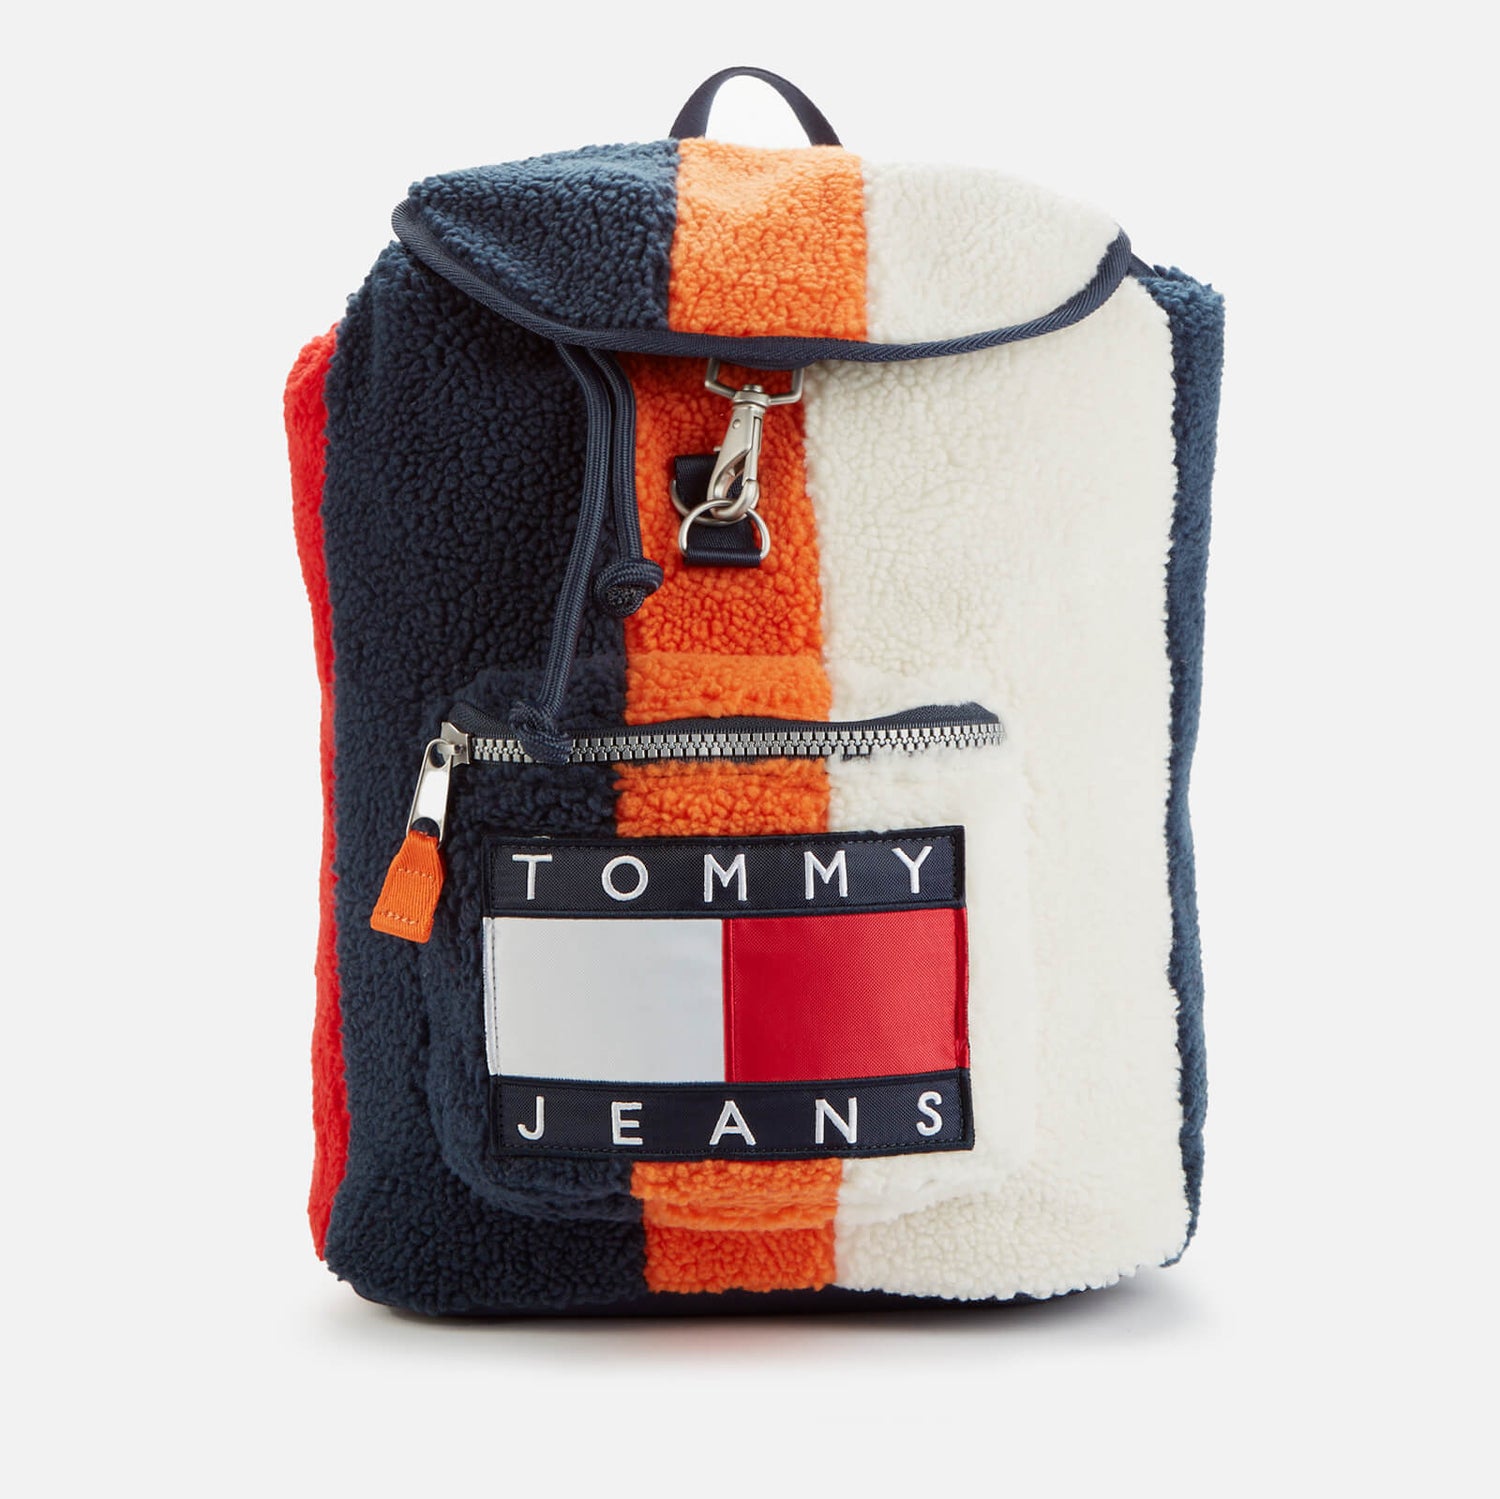 Tommy Jeans Men's Heritage Colourblock Backpack - Multi